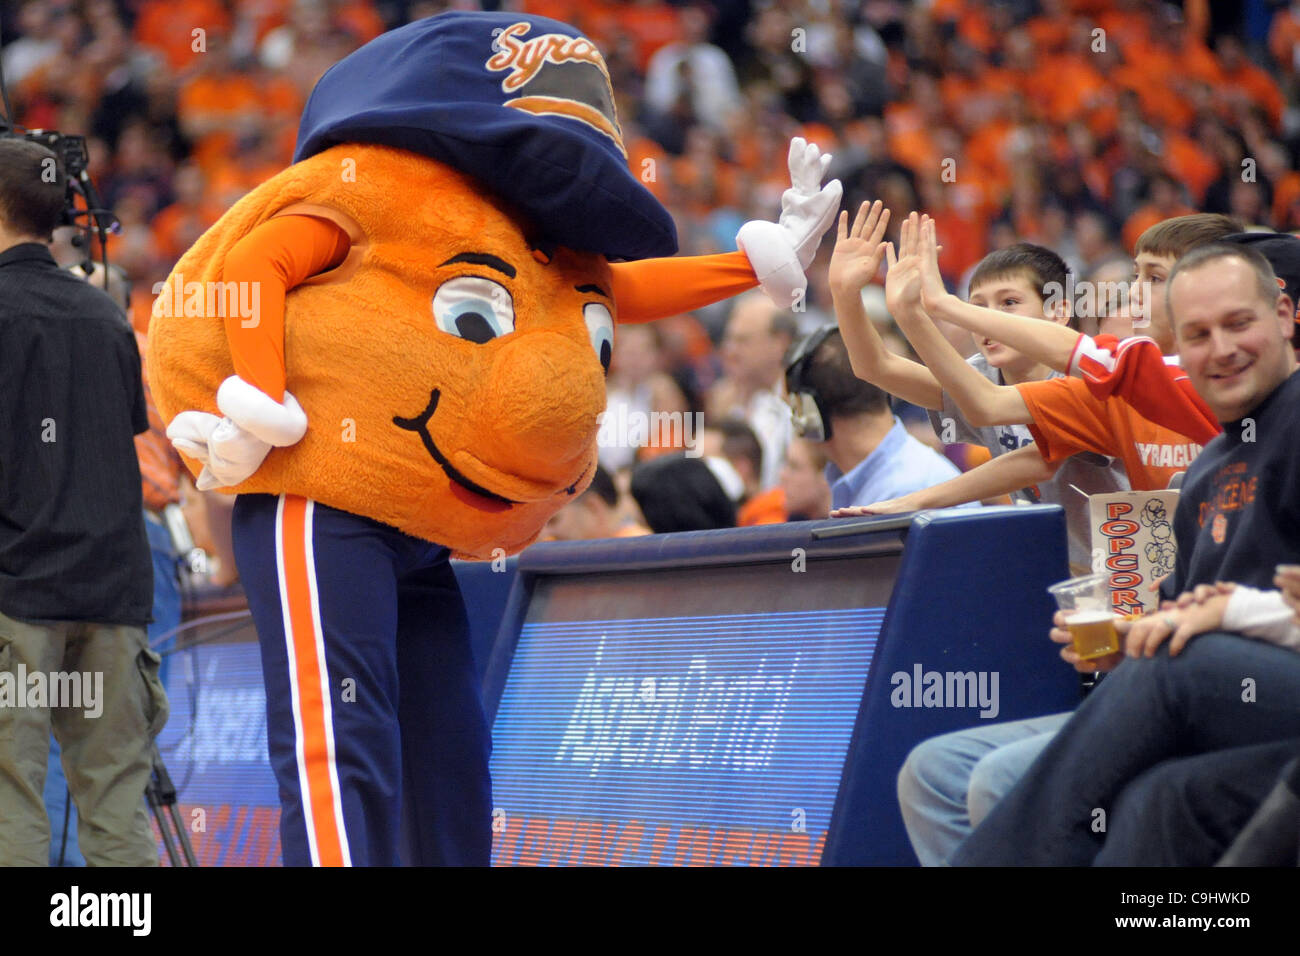 Jan. 7, 2012 - Syracuse, New York, U.S - Syracuse Orange mascot Otto high fives some fans before the start of the game at the Carrier Dome in Syracuse, NY.  Number one ranked Syracuse leads Marquette 37-19 at the half. (Credit Image: © Michael Johnson/Southcreek/ZUMAPRESS.com) Stock Photo